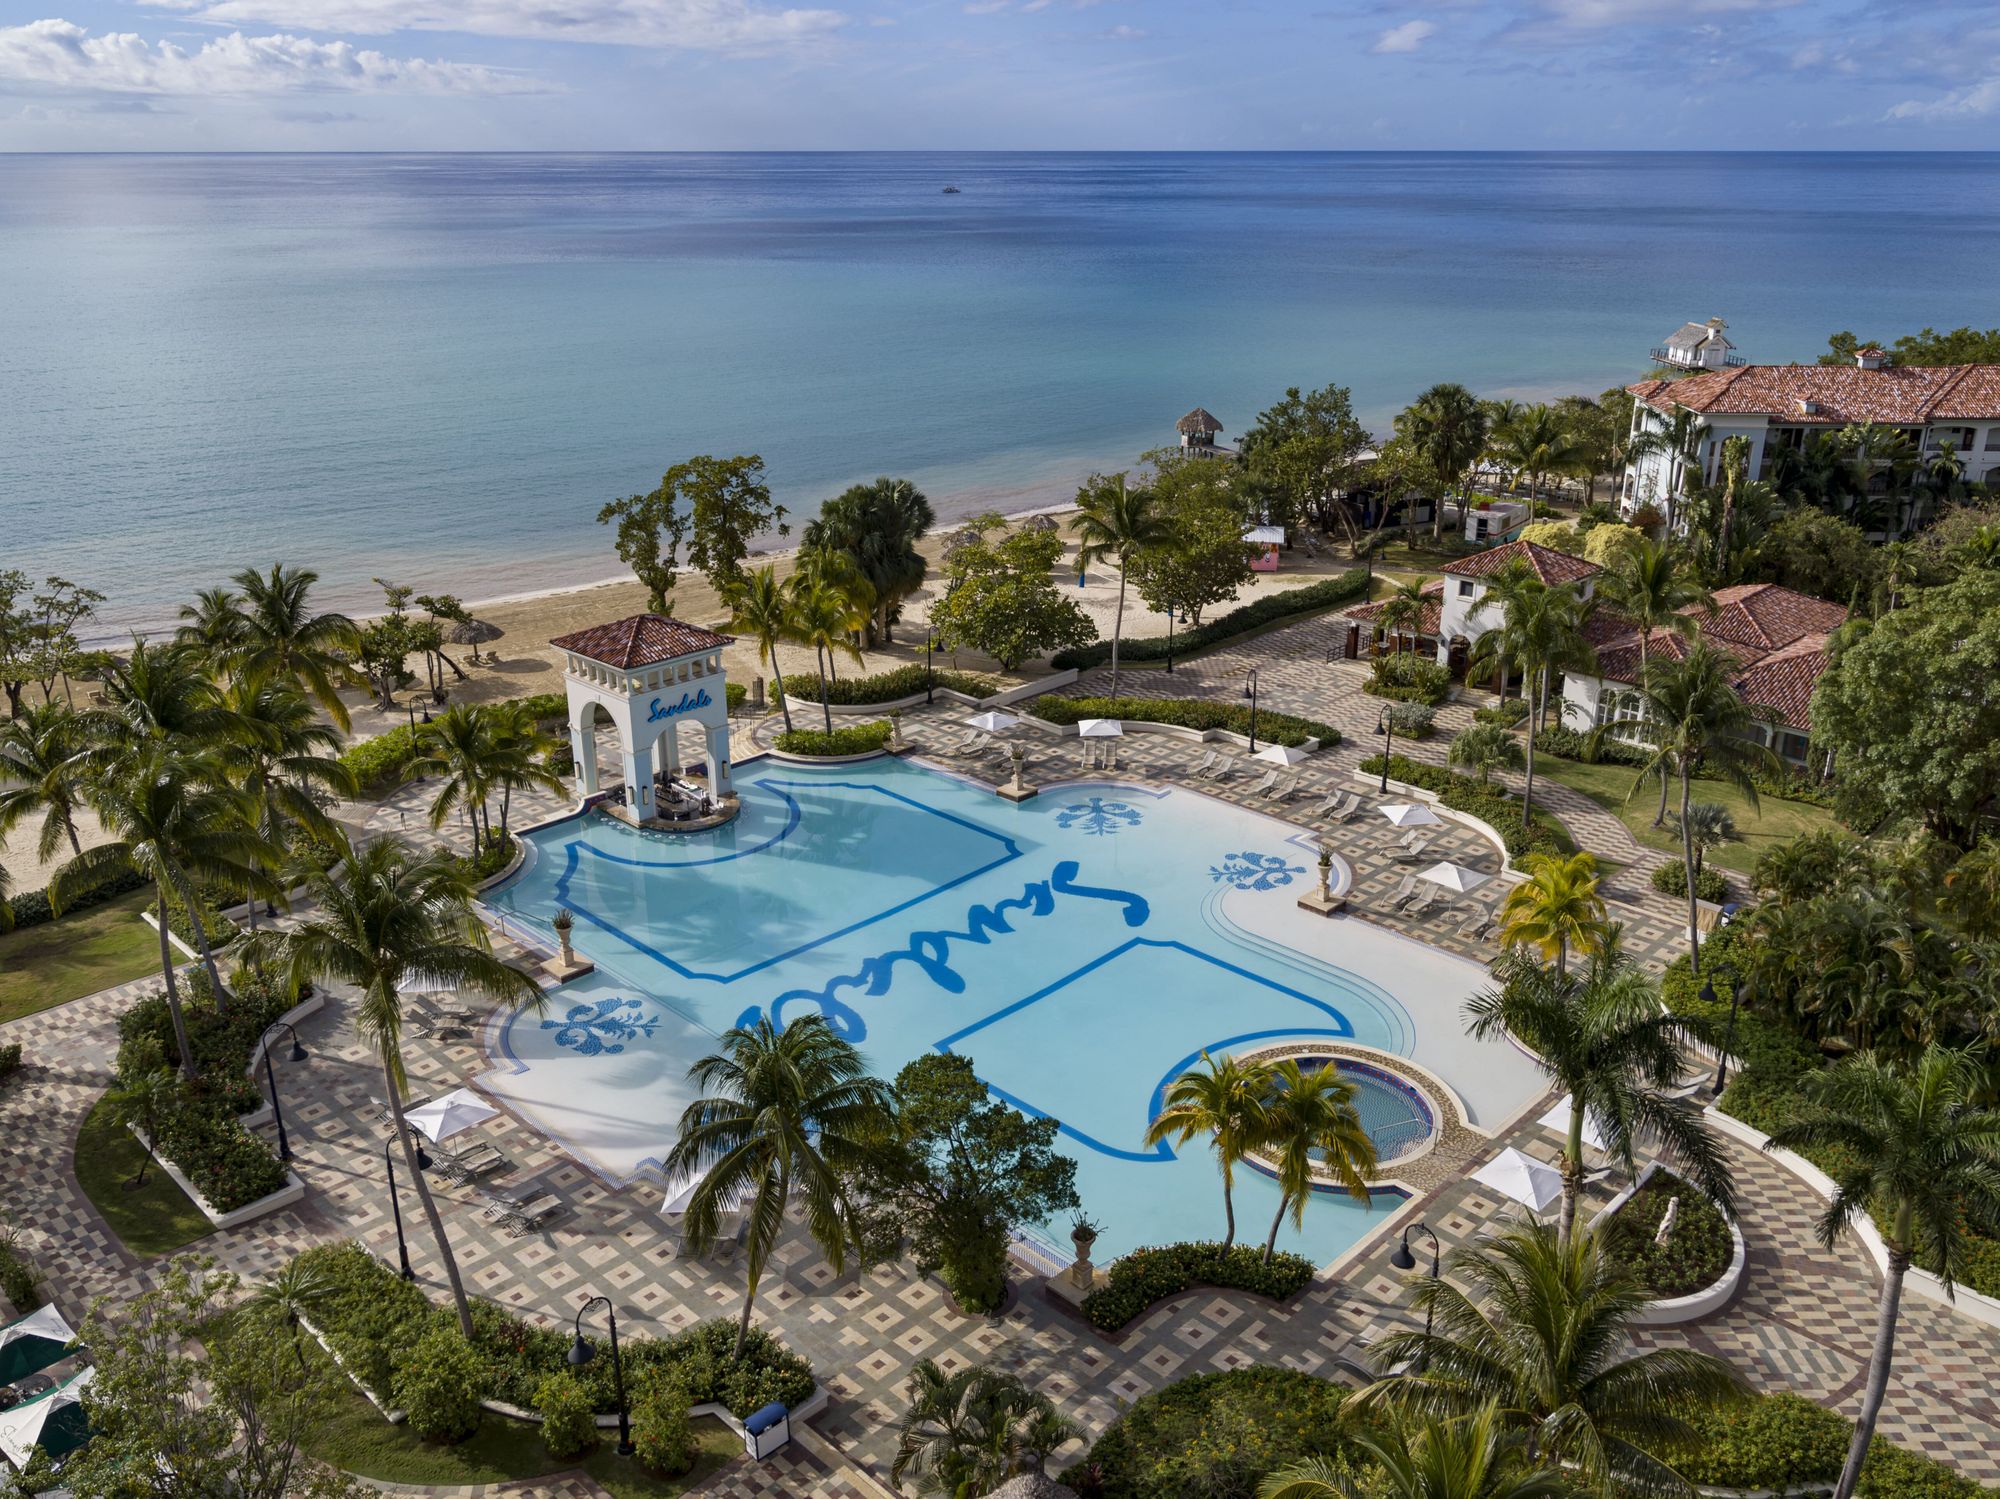 How Much It Costs To Stay At Sandals & Why It’s Worth The Money